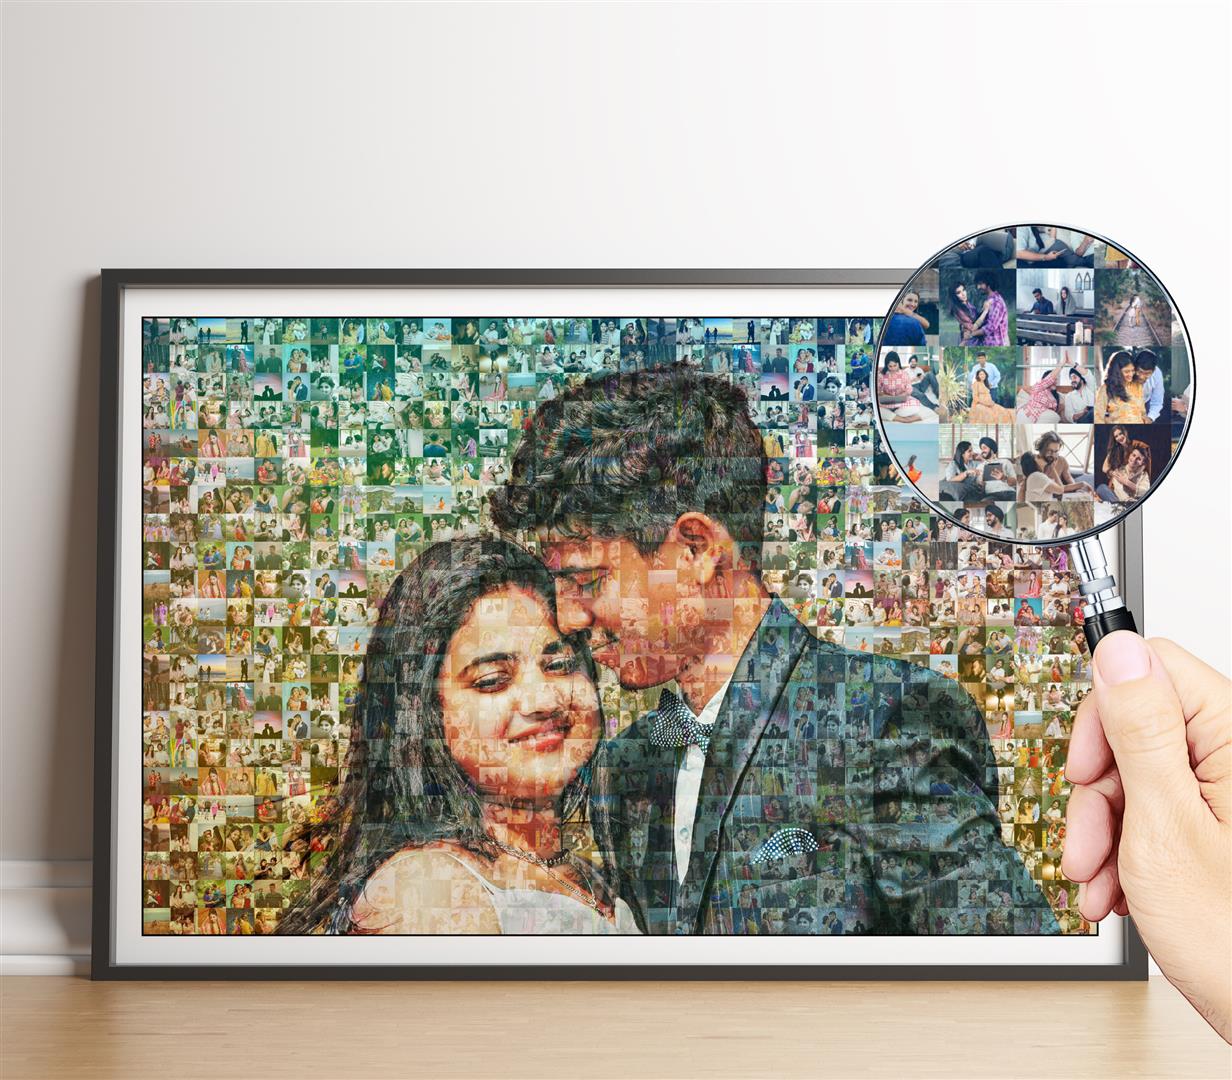 Birthday gift for husband - Personalized photo mosaic for a memorable celebration